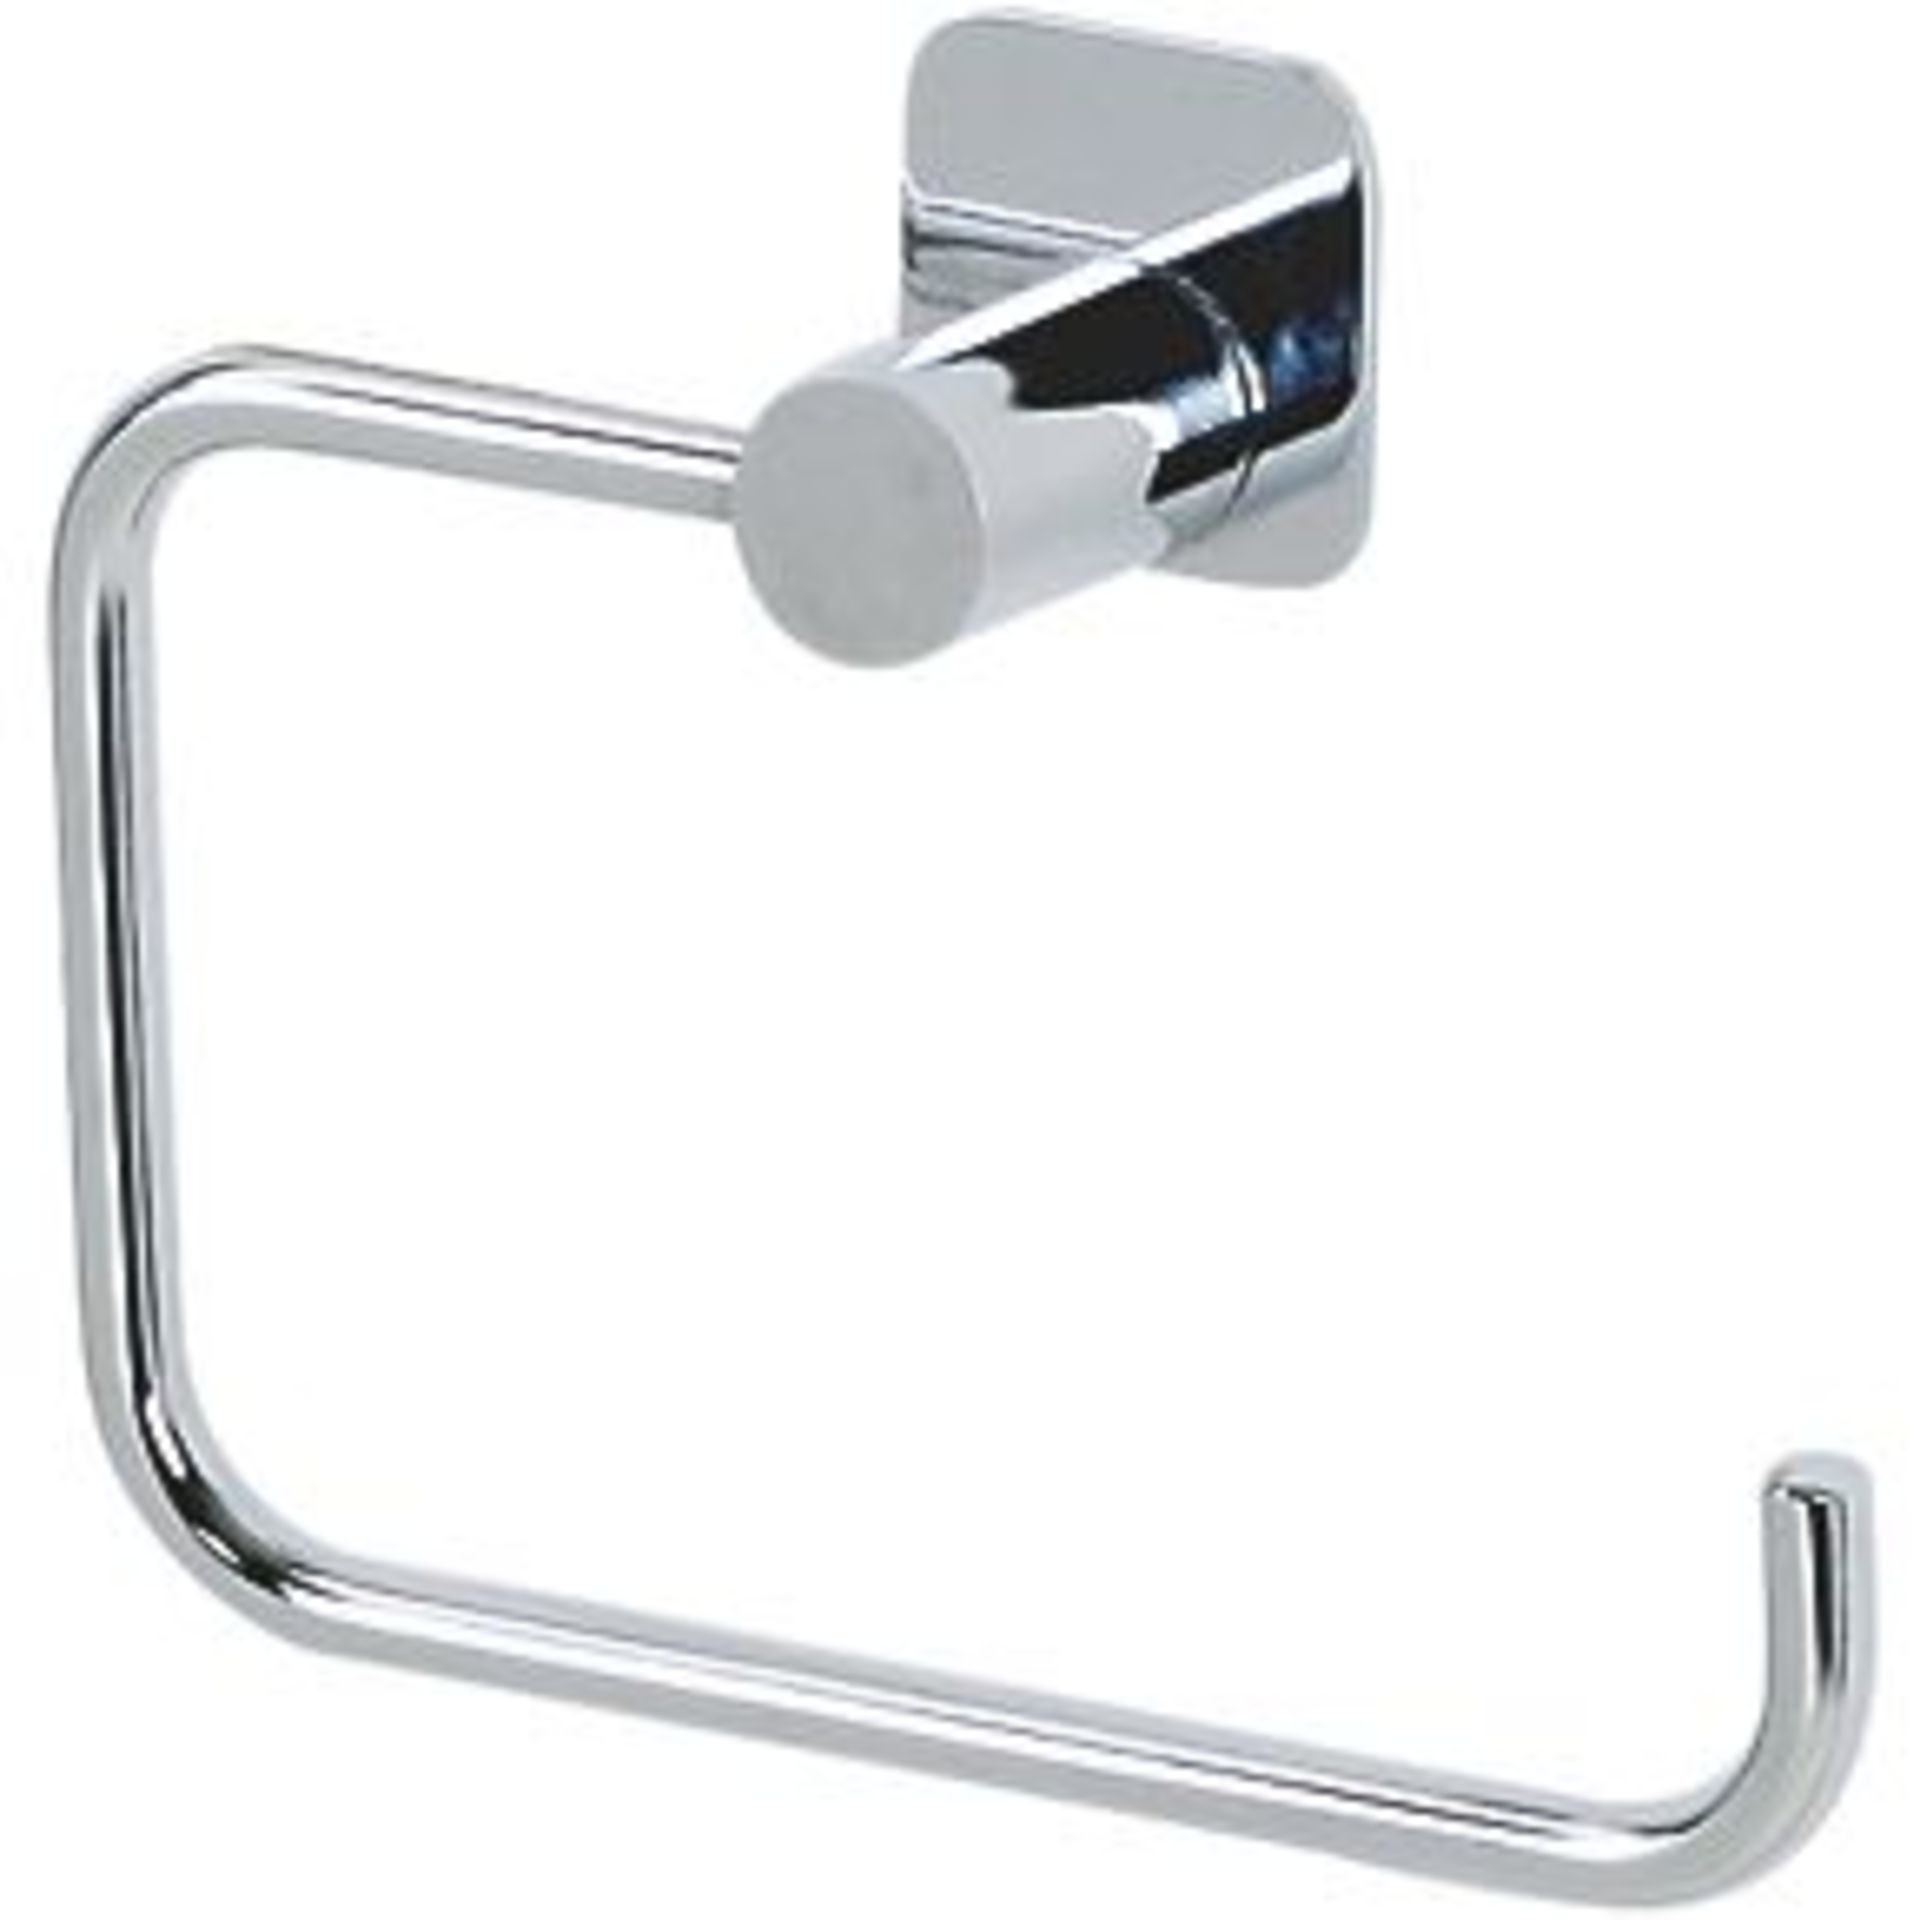 New (P40) Koros Silver Effect Wall-Mounted Toilet Roll Holder (W)153mm When Fixed On The Wall, ...